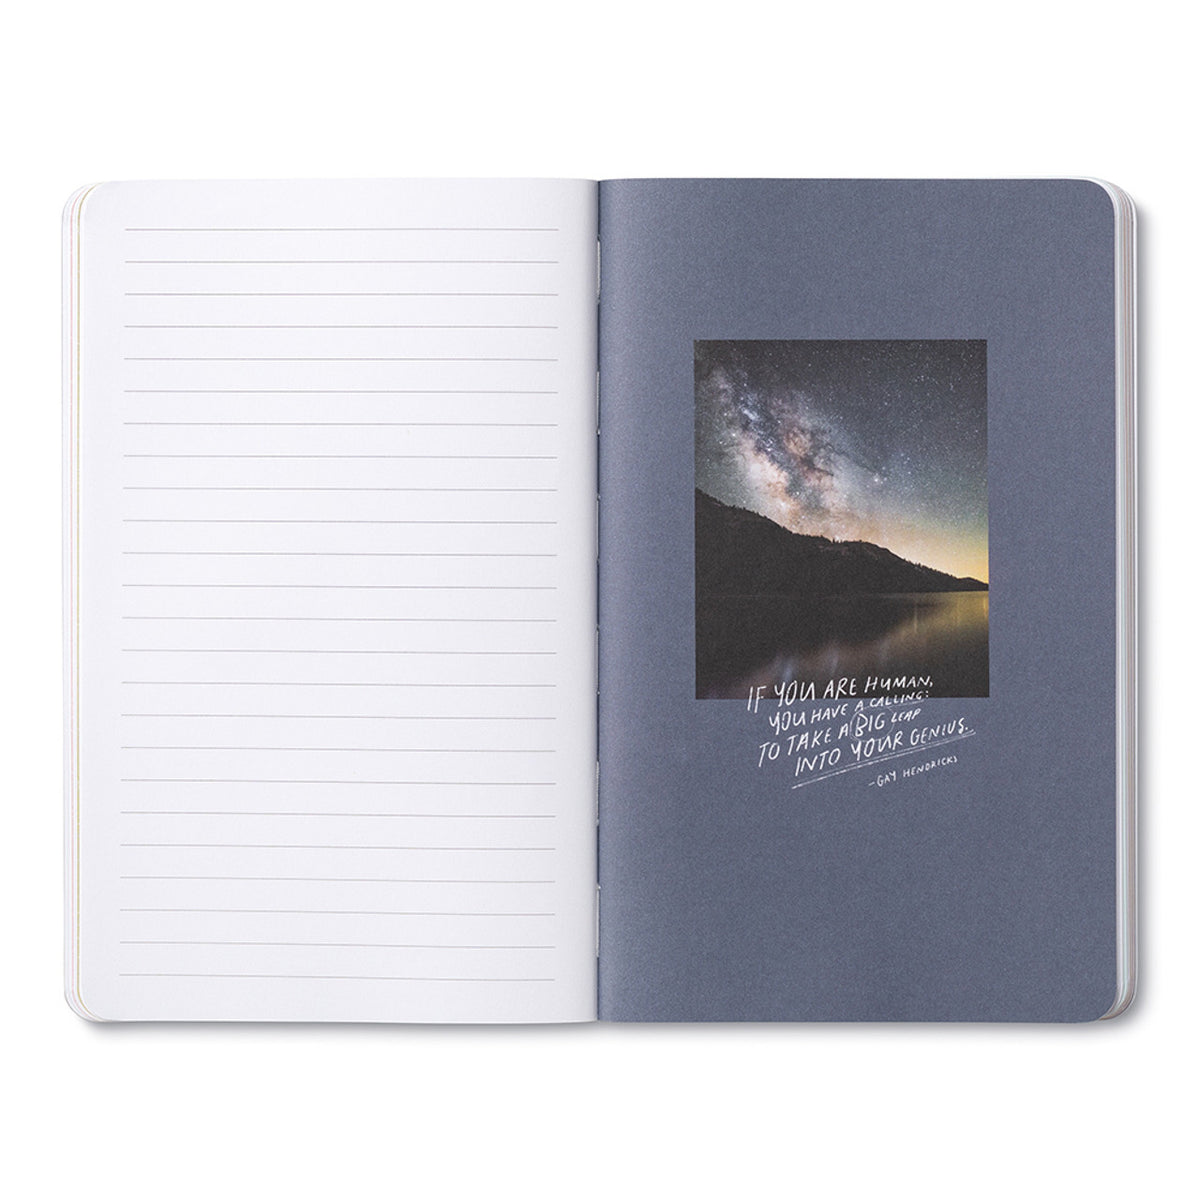 &quot;...All Serious Daring Starts From Within&quot; — Eudora Welty Write Now Softcover Journal